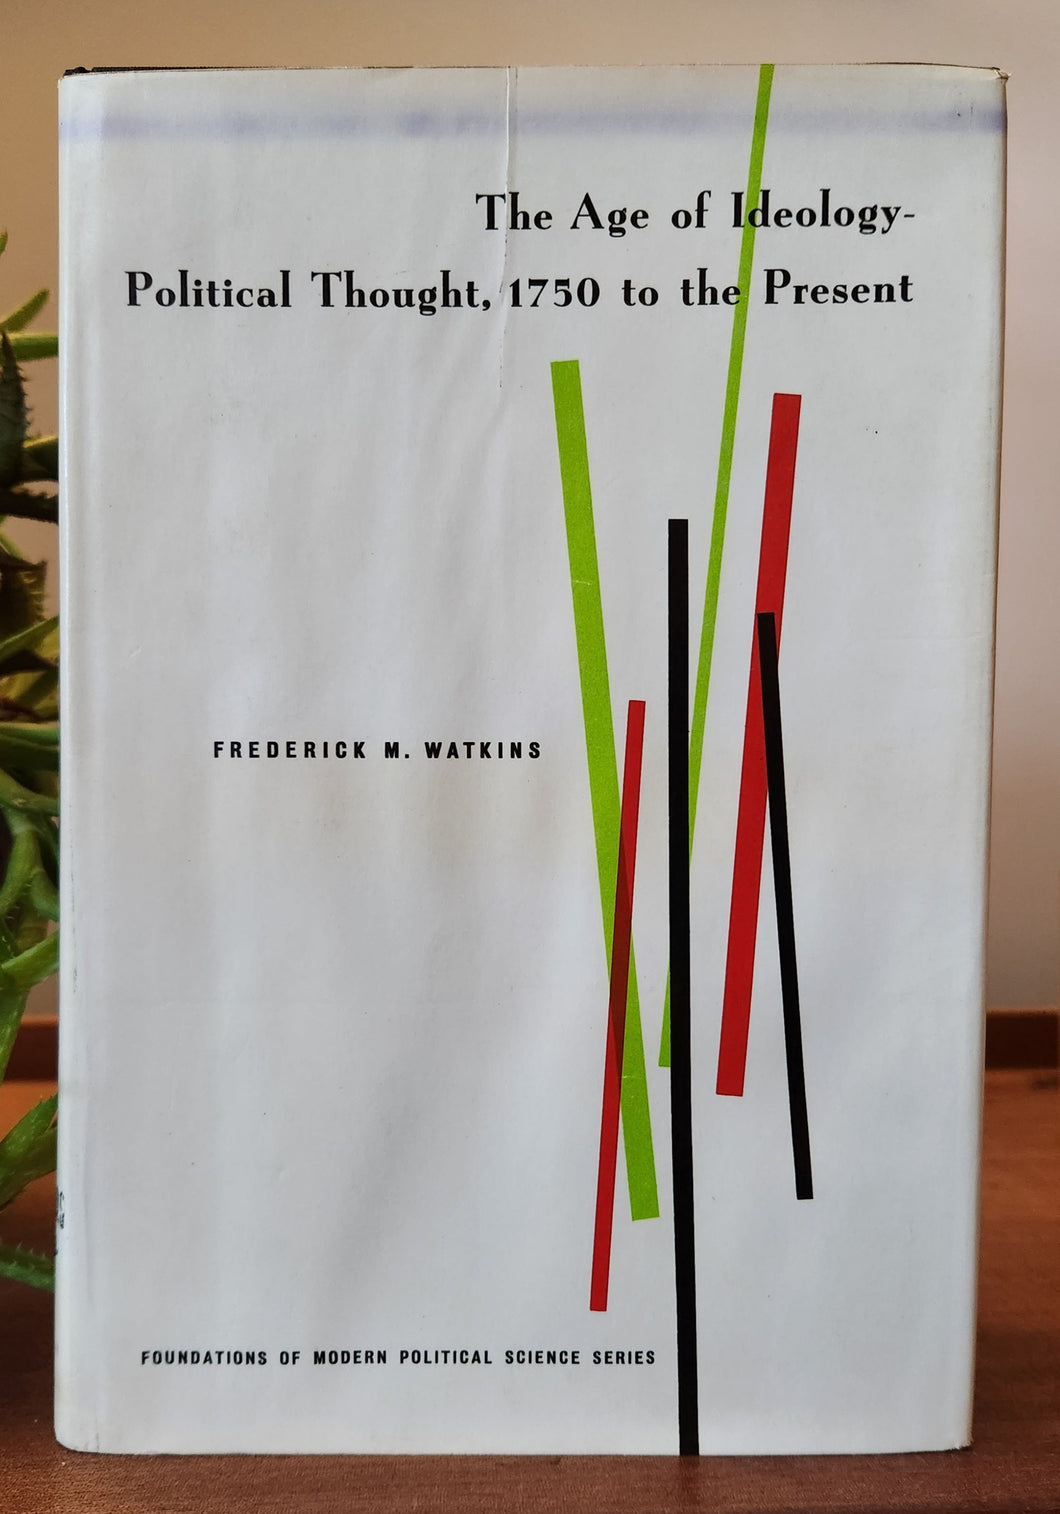 The Age of Ideology - Political Thought, 1750 to the Present by Frederick M. Watkins (First Edition)